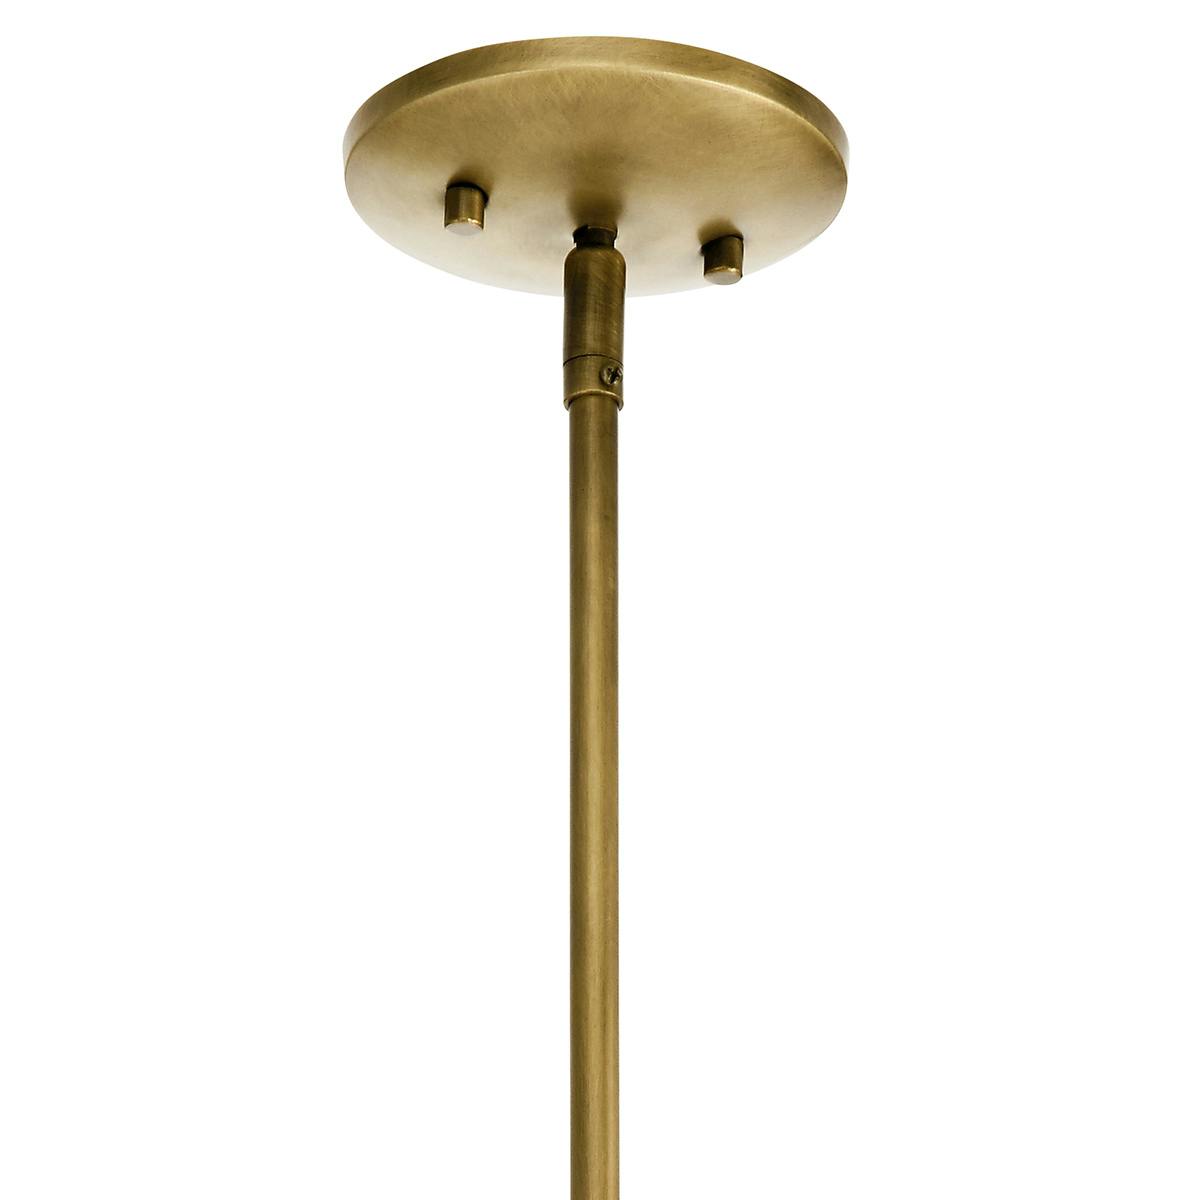 Canopy for the Thisbe 18" 3 Light Mini Chandelier Brass on a white background